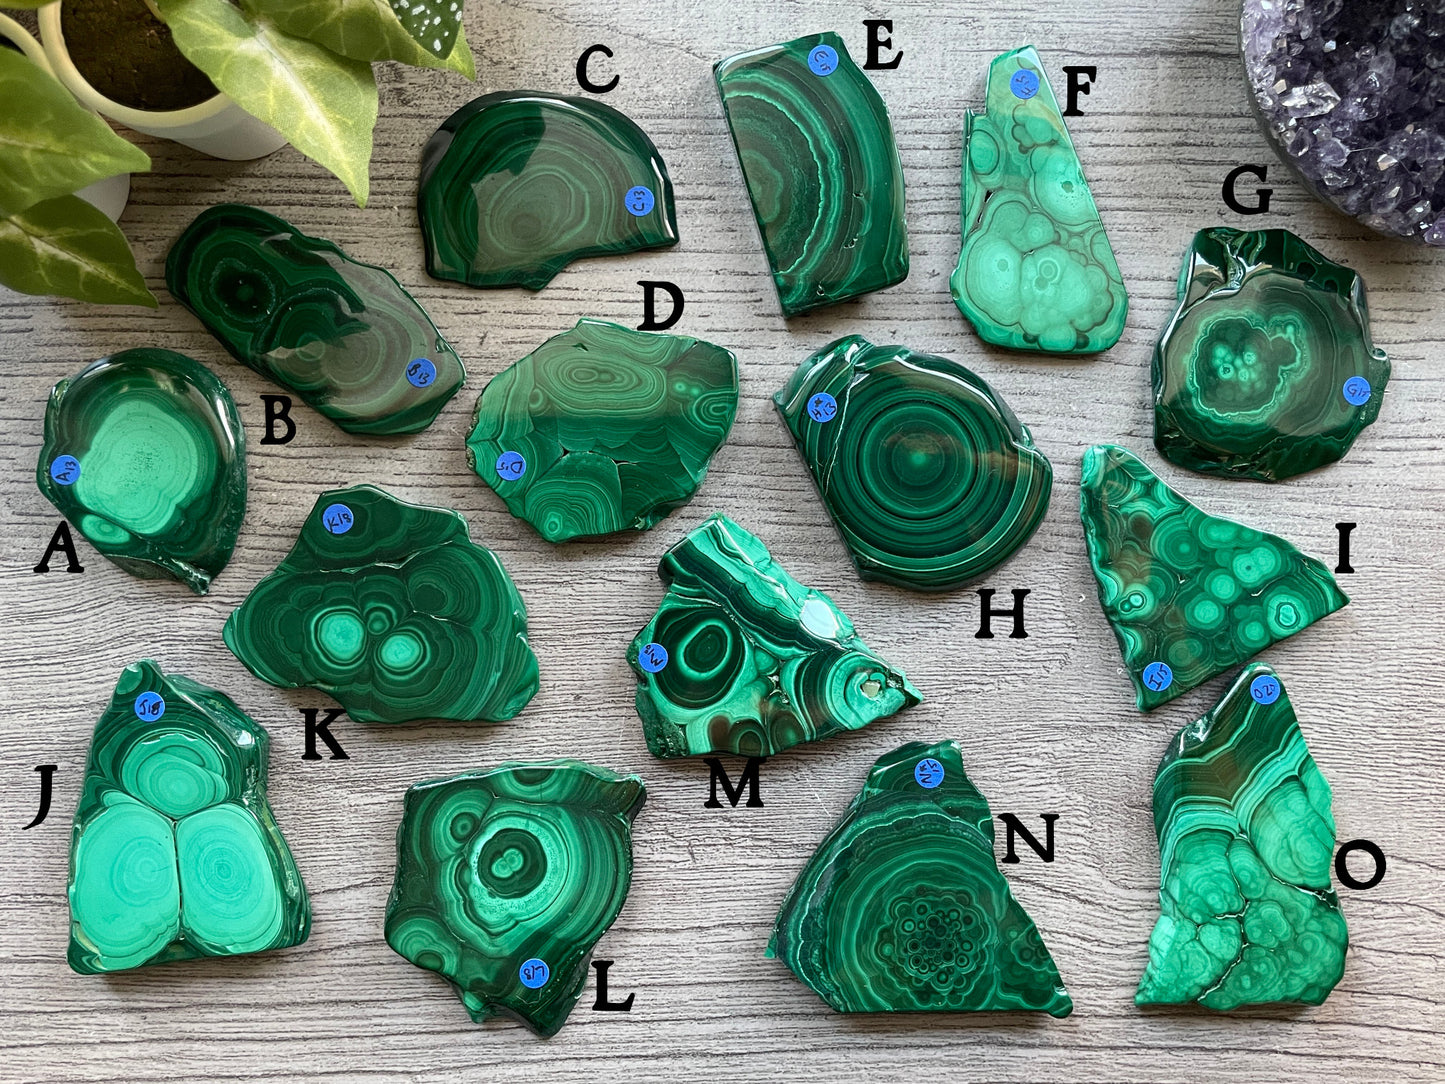 Pictured are various slabs of polished malachite.